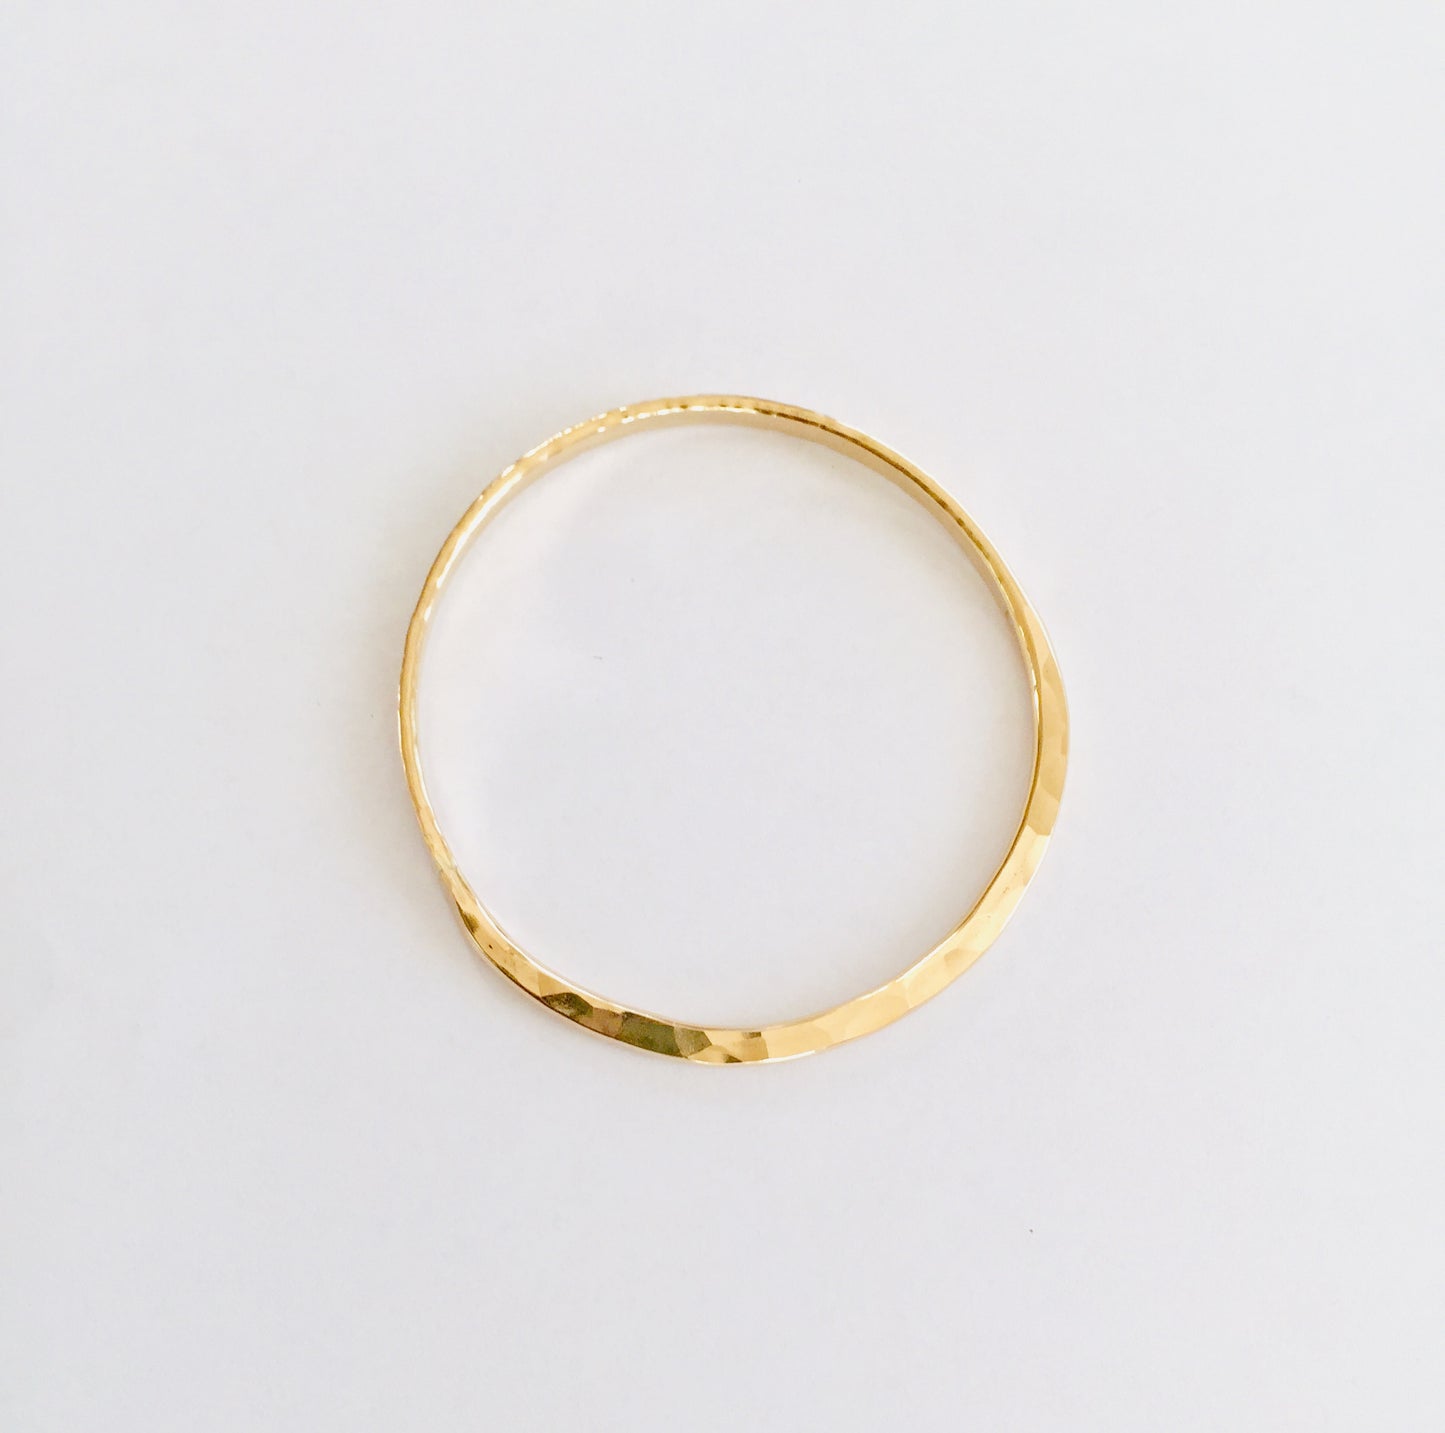 Hand forged 14K gold filled bangle 'square'.